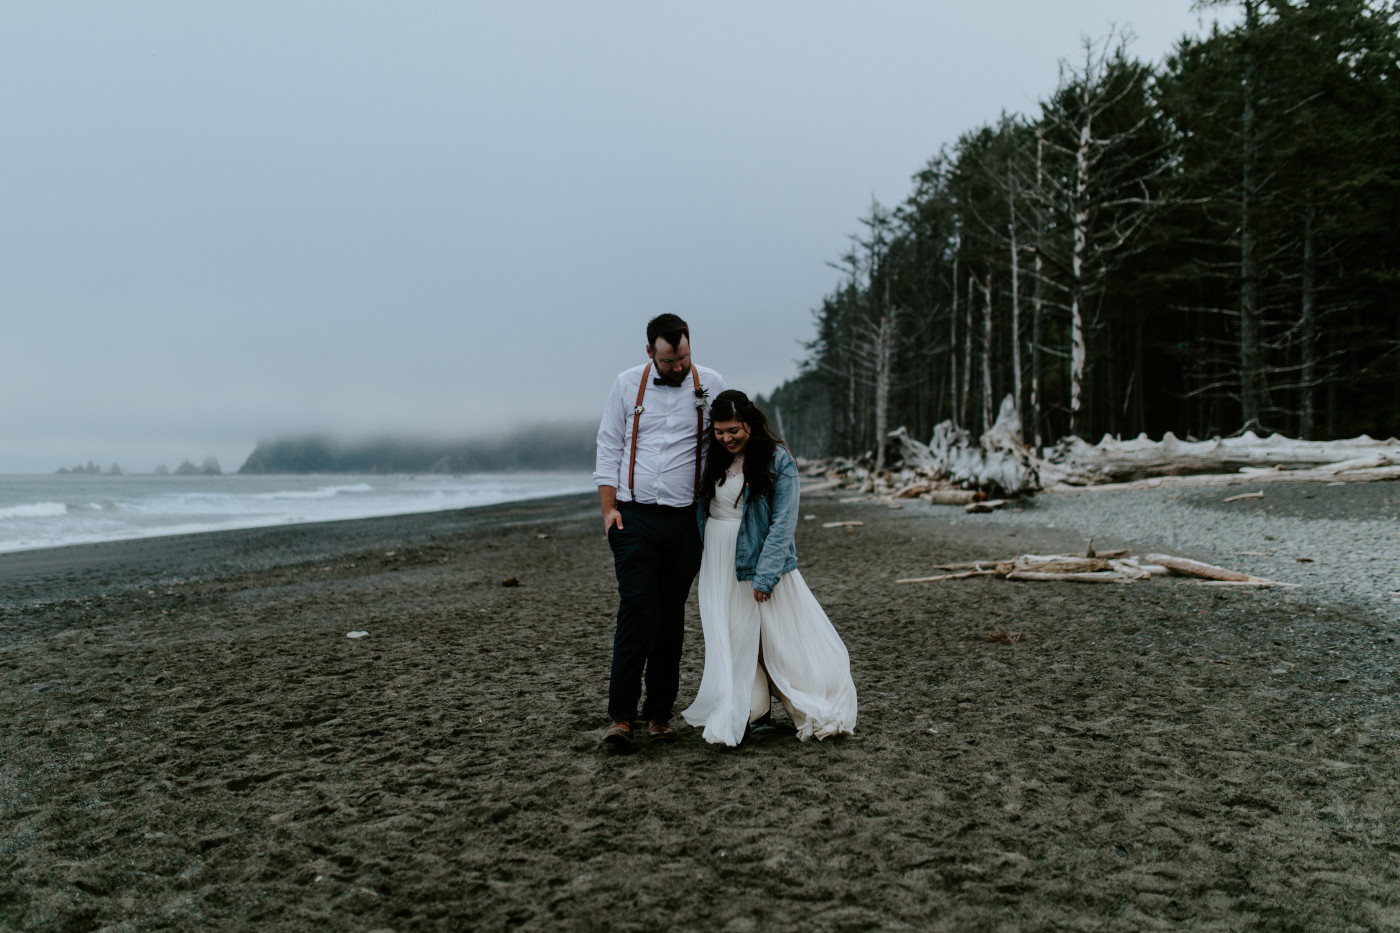 Brooke and Jack walking on the beach. Elopement photography at Olympic National Park by Sienna Plus Josh.